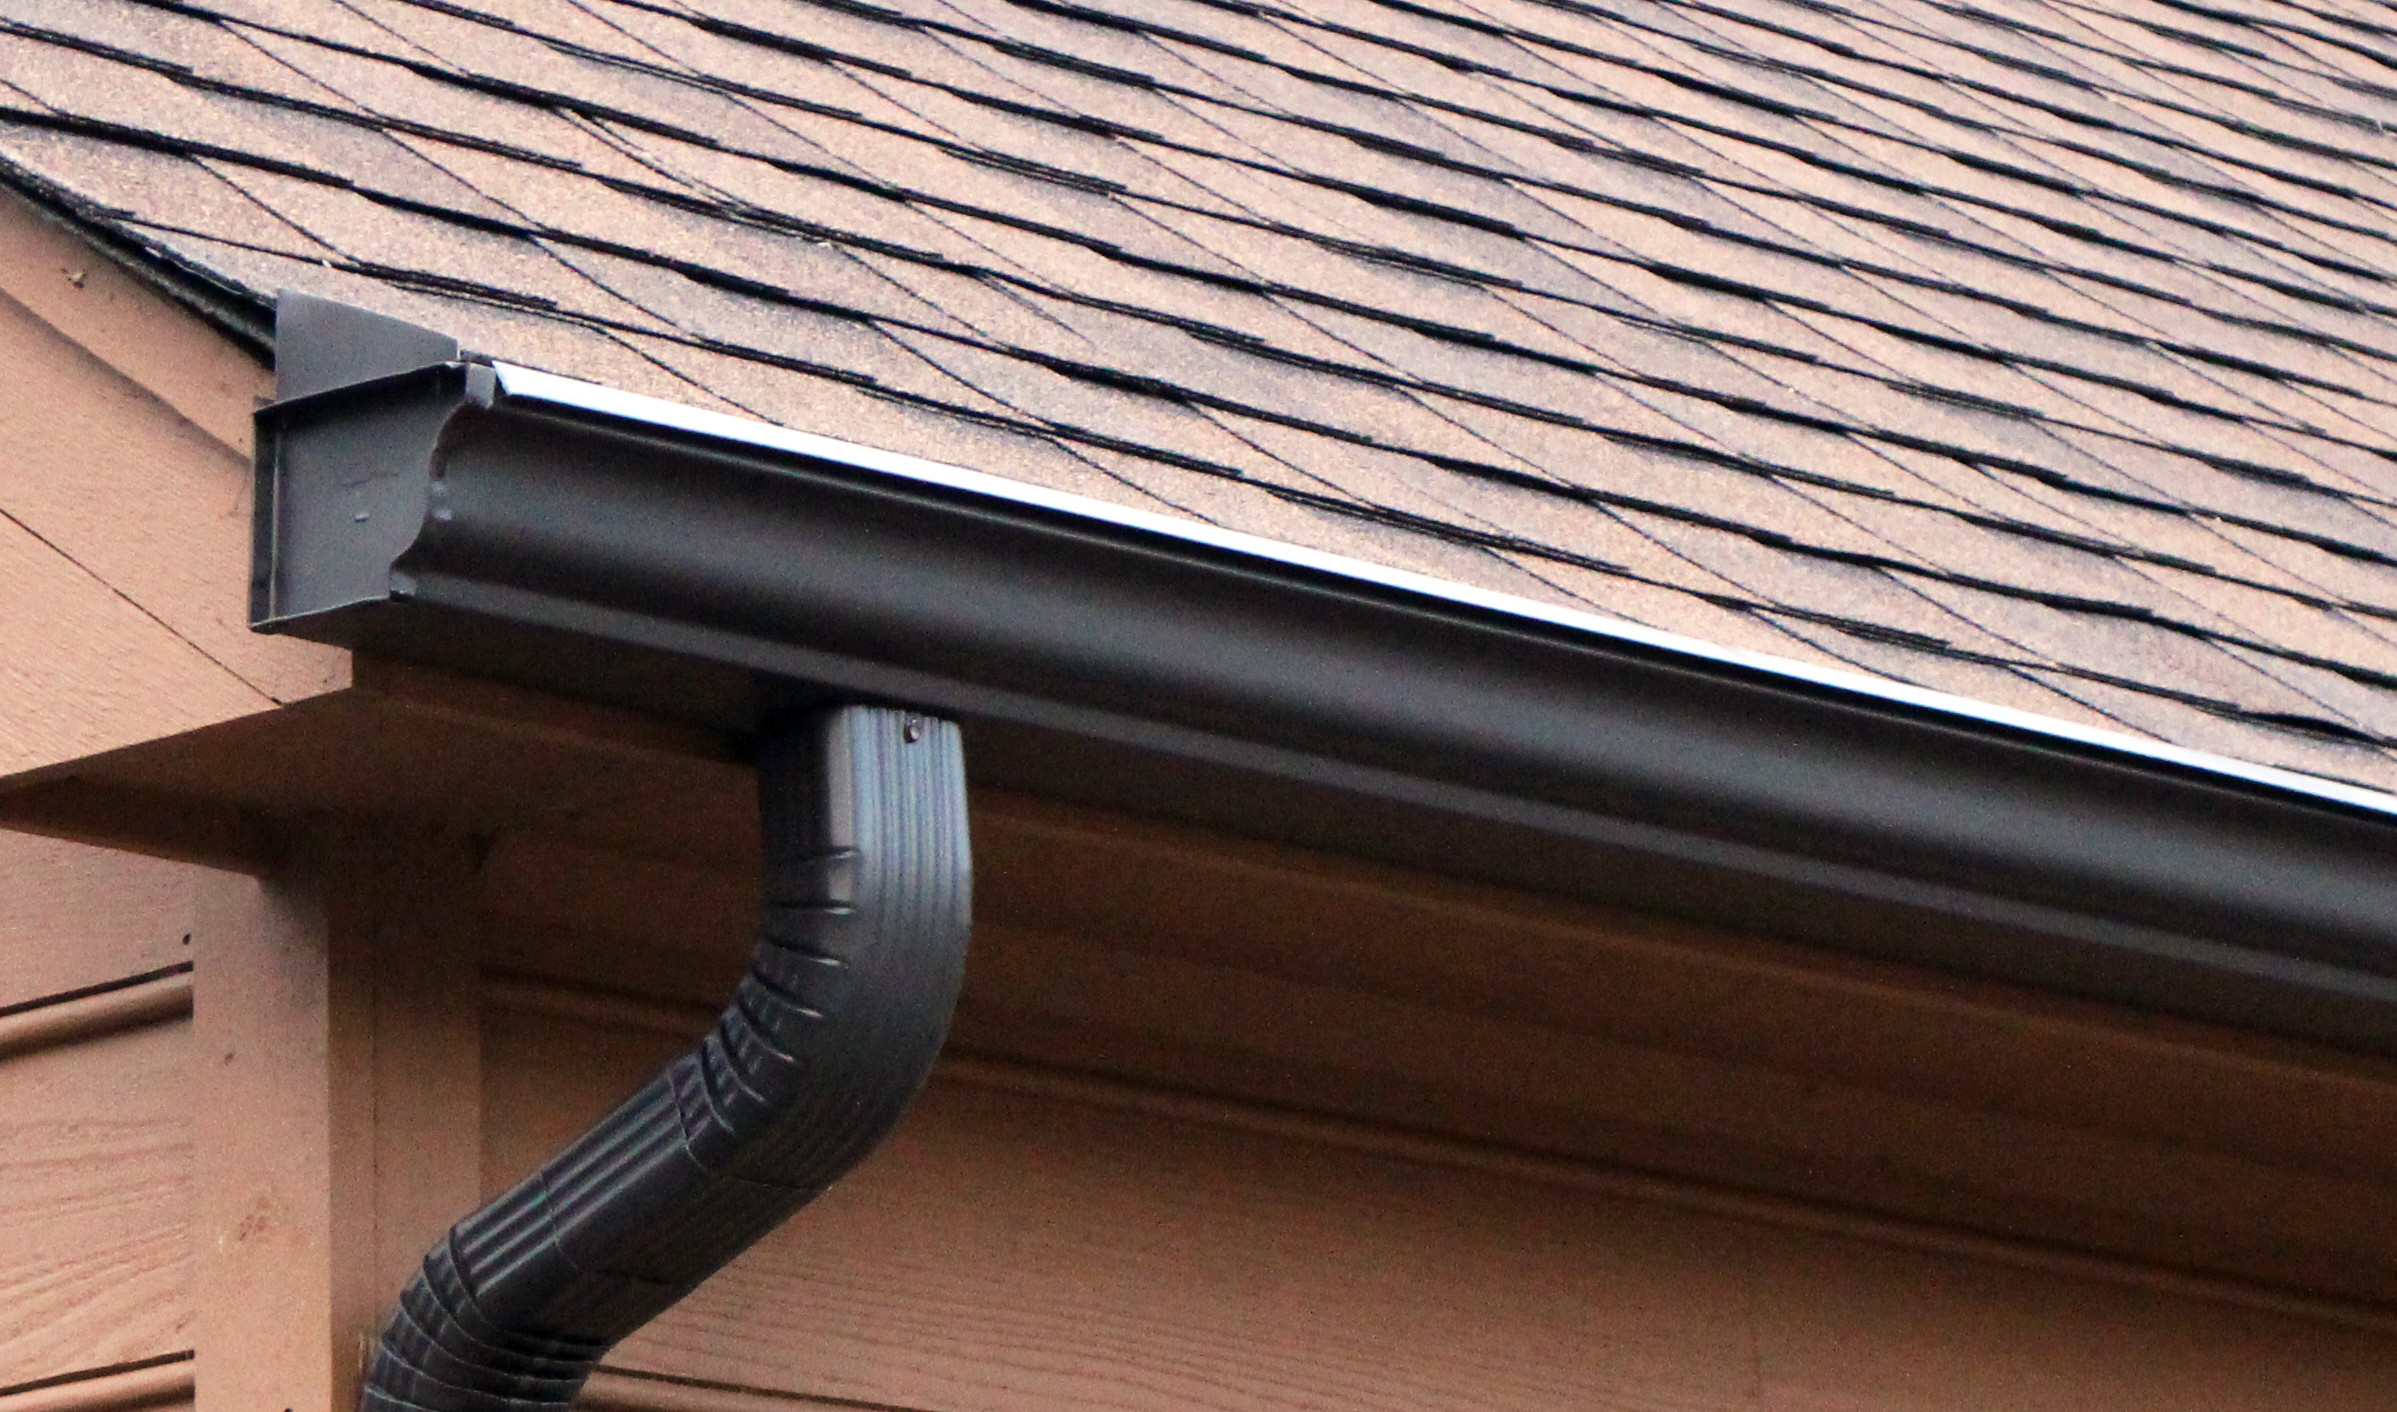 gutter guards that help direct water and prevent water damage